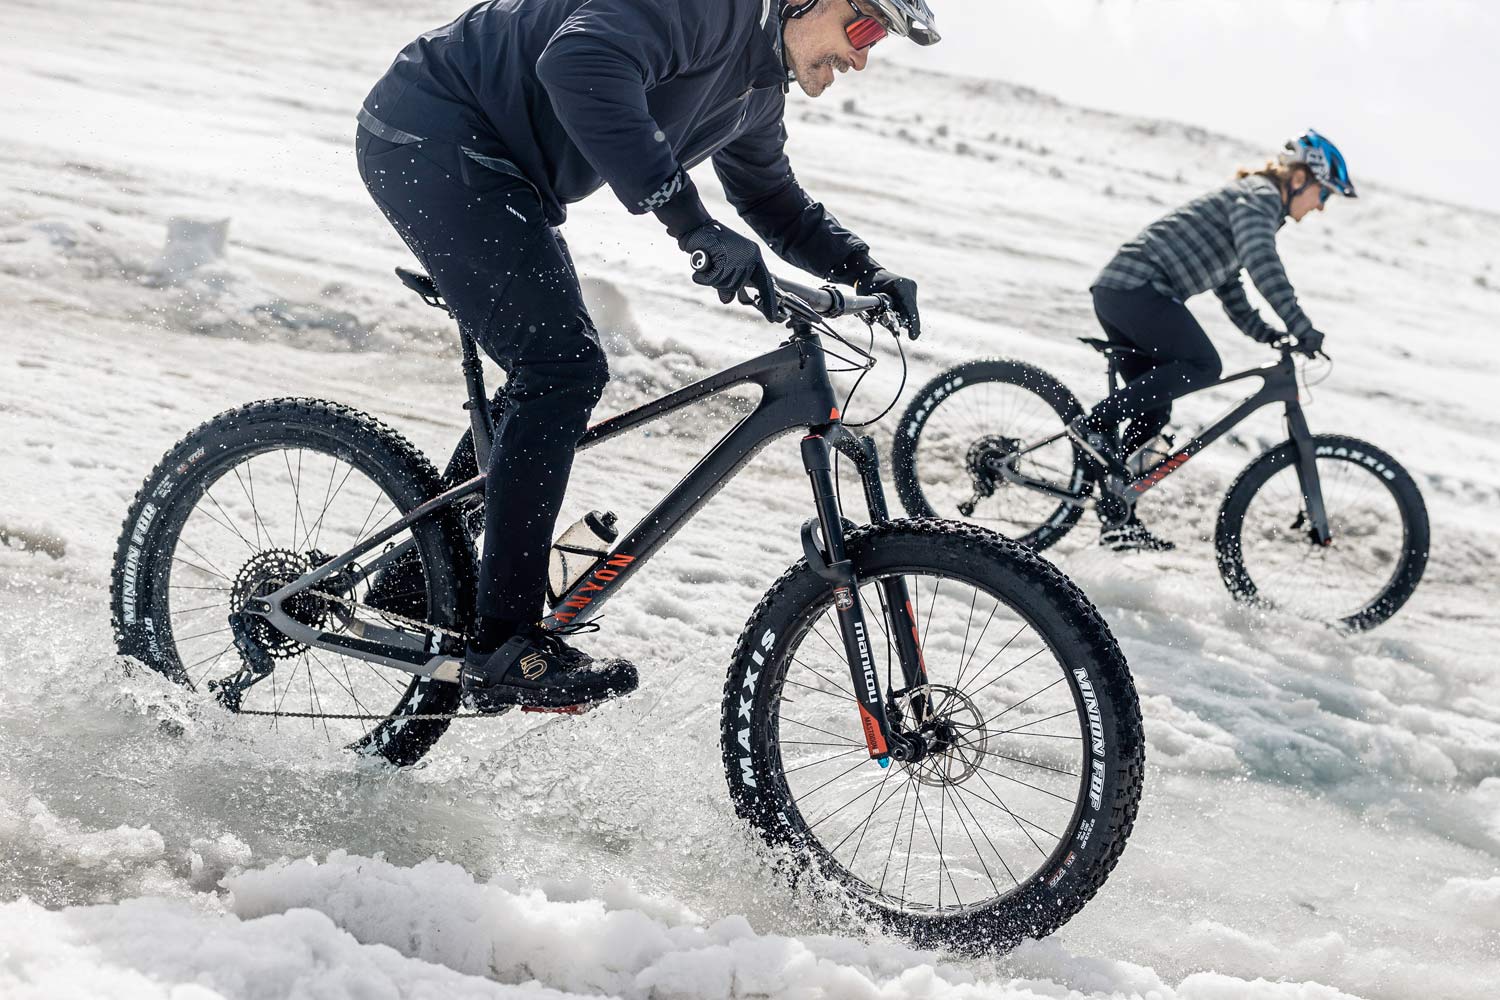 2021 Canyon Dude carbon fat bike goes 27.5x3.8", wet snow shred